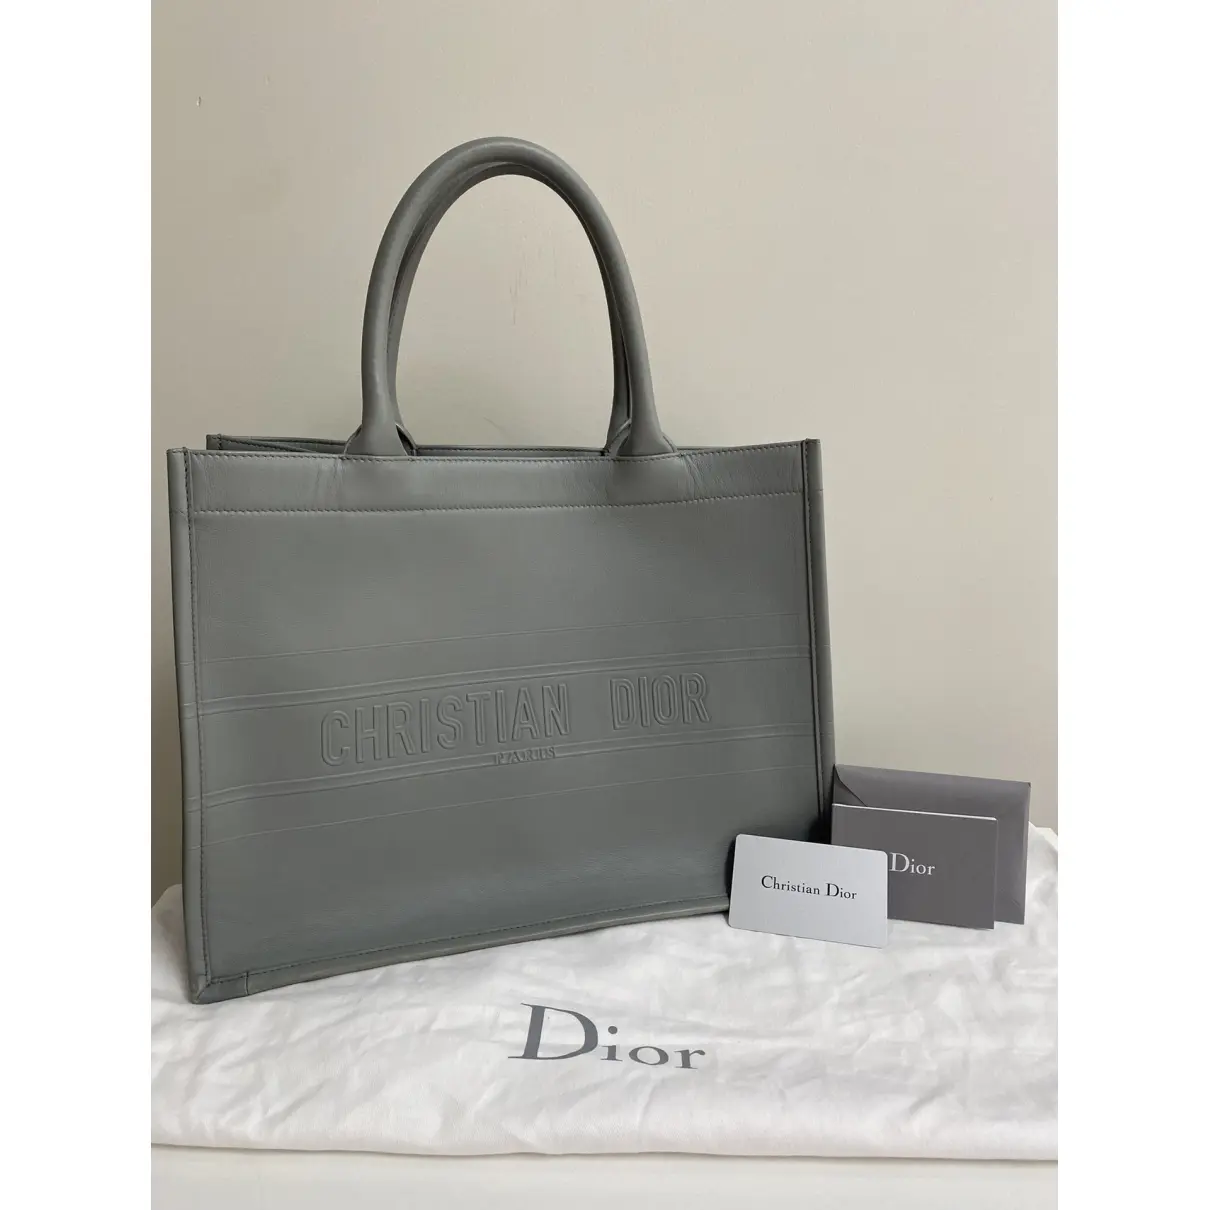 Buy Dior Book Tote leather tote online